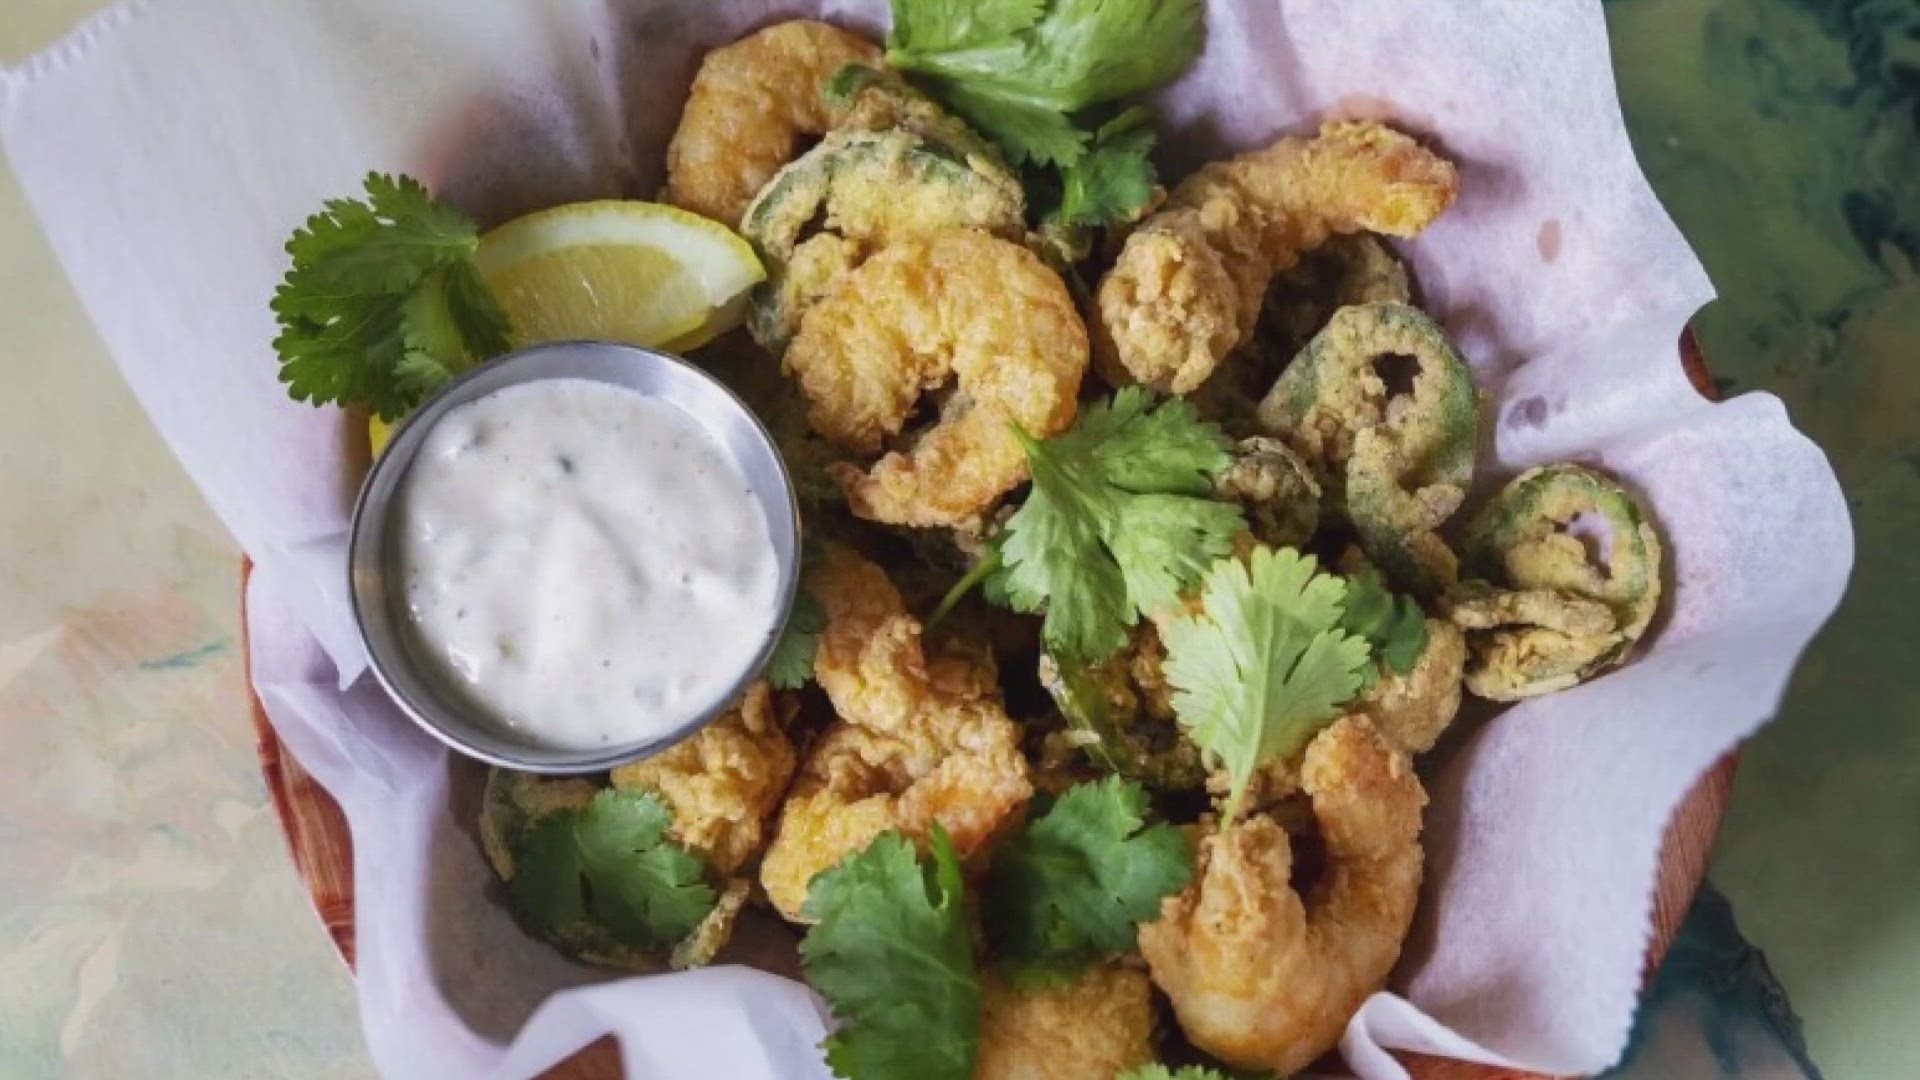 Food writer Ian McNulty from the Times Picayune-New Orleans Advocate to tell us where you can enjoy delicious seafood in the metro area this Lent.